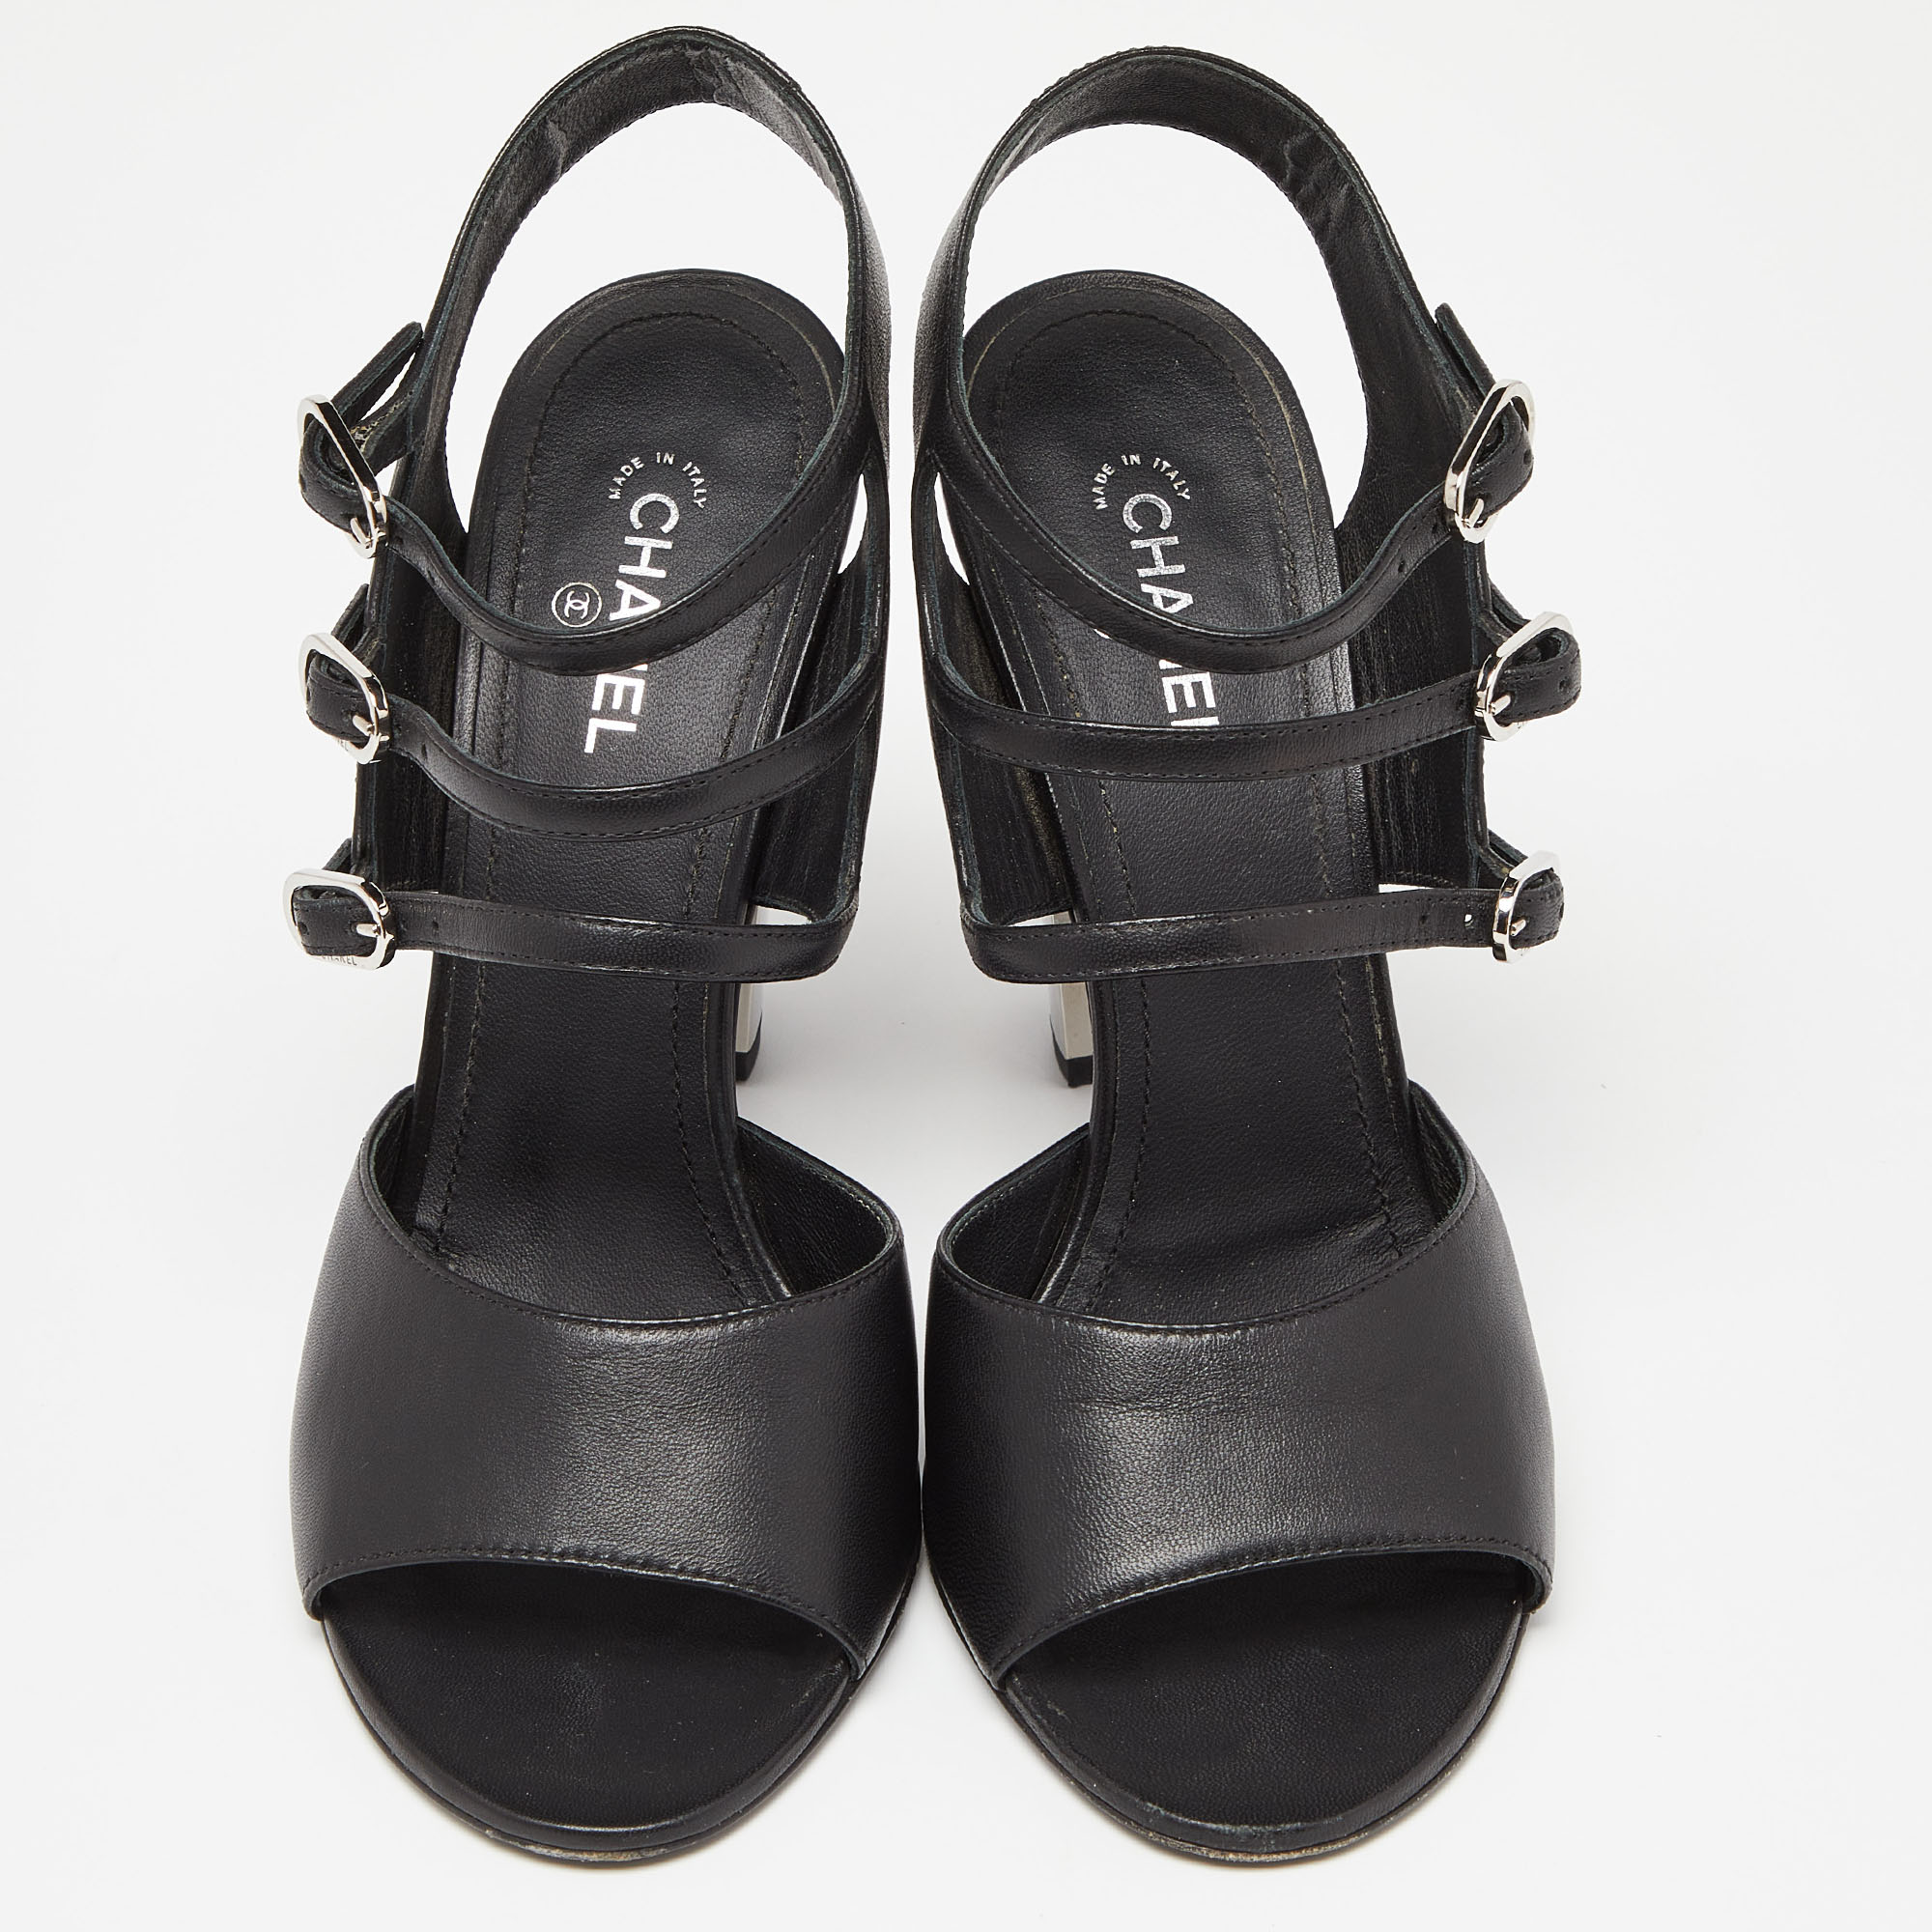 Chanel Black Leather Strappy Buckle Sandals Size 39